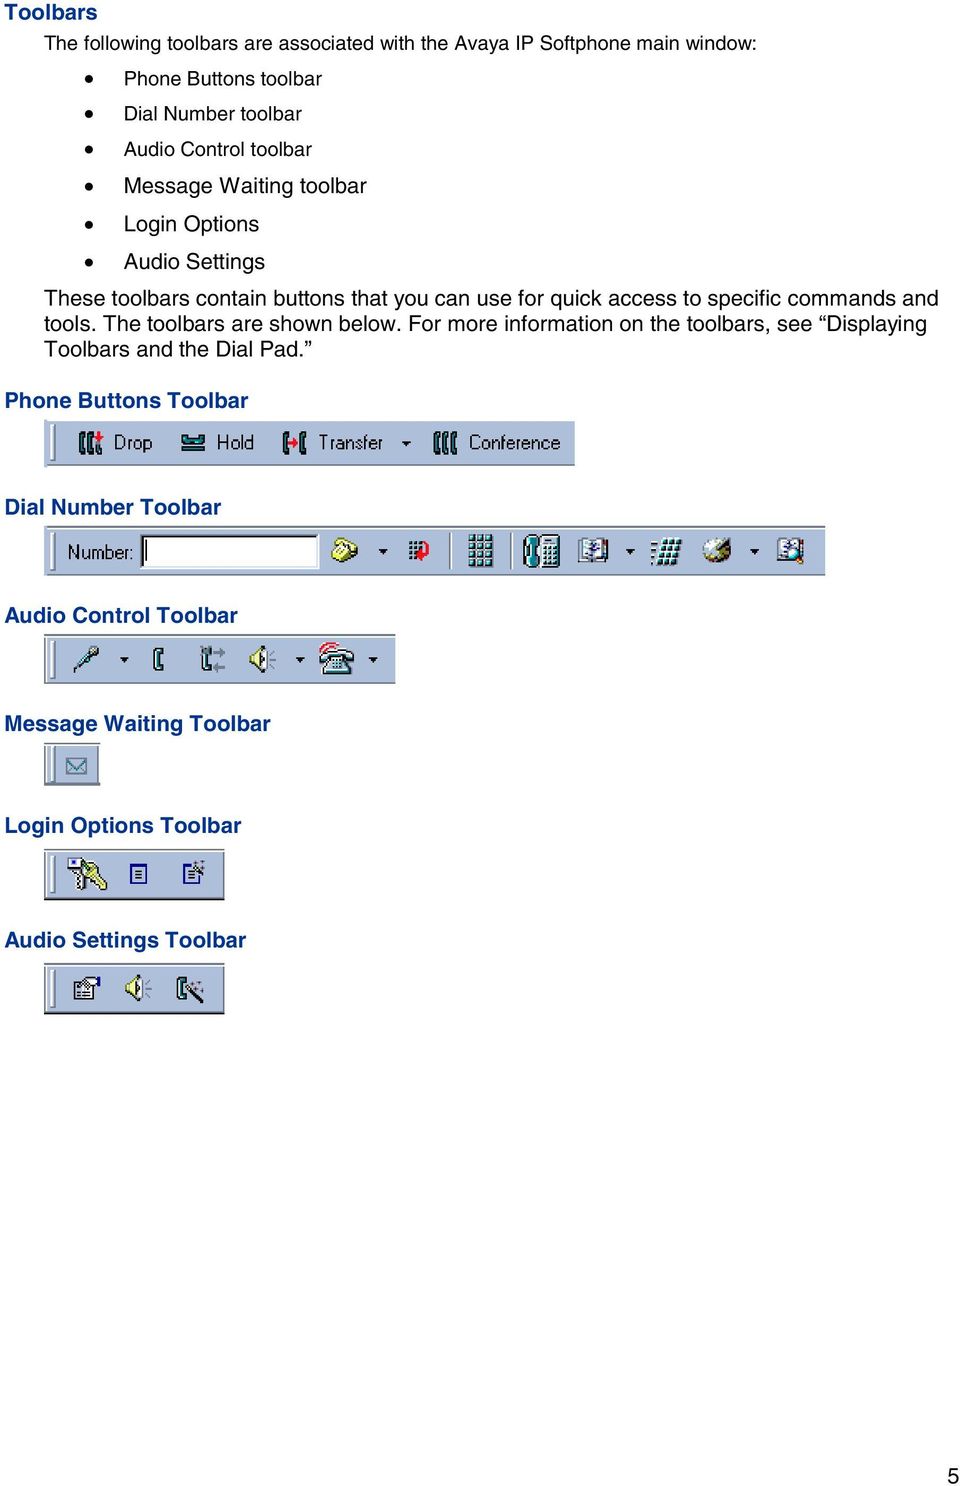 specific commands and tools. The toolbars are shown below.